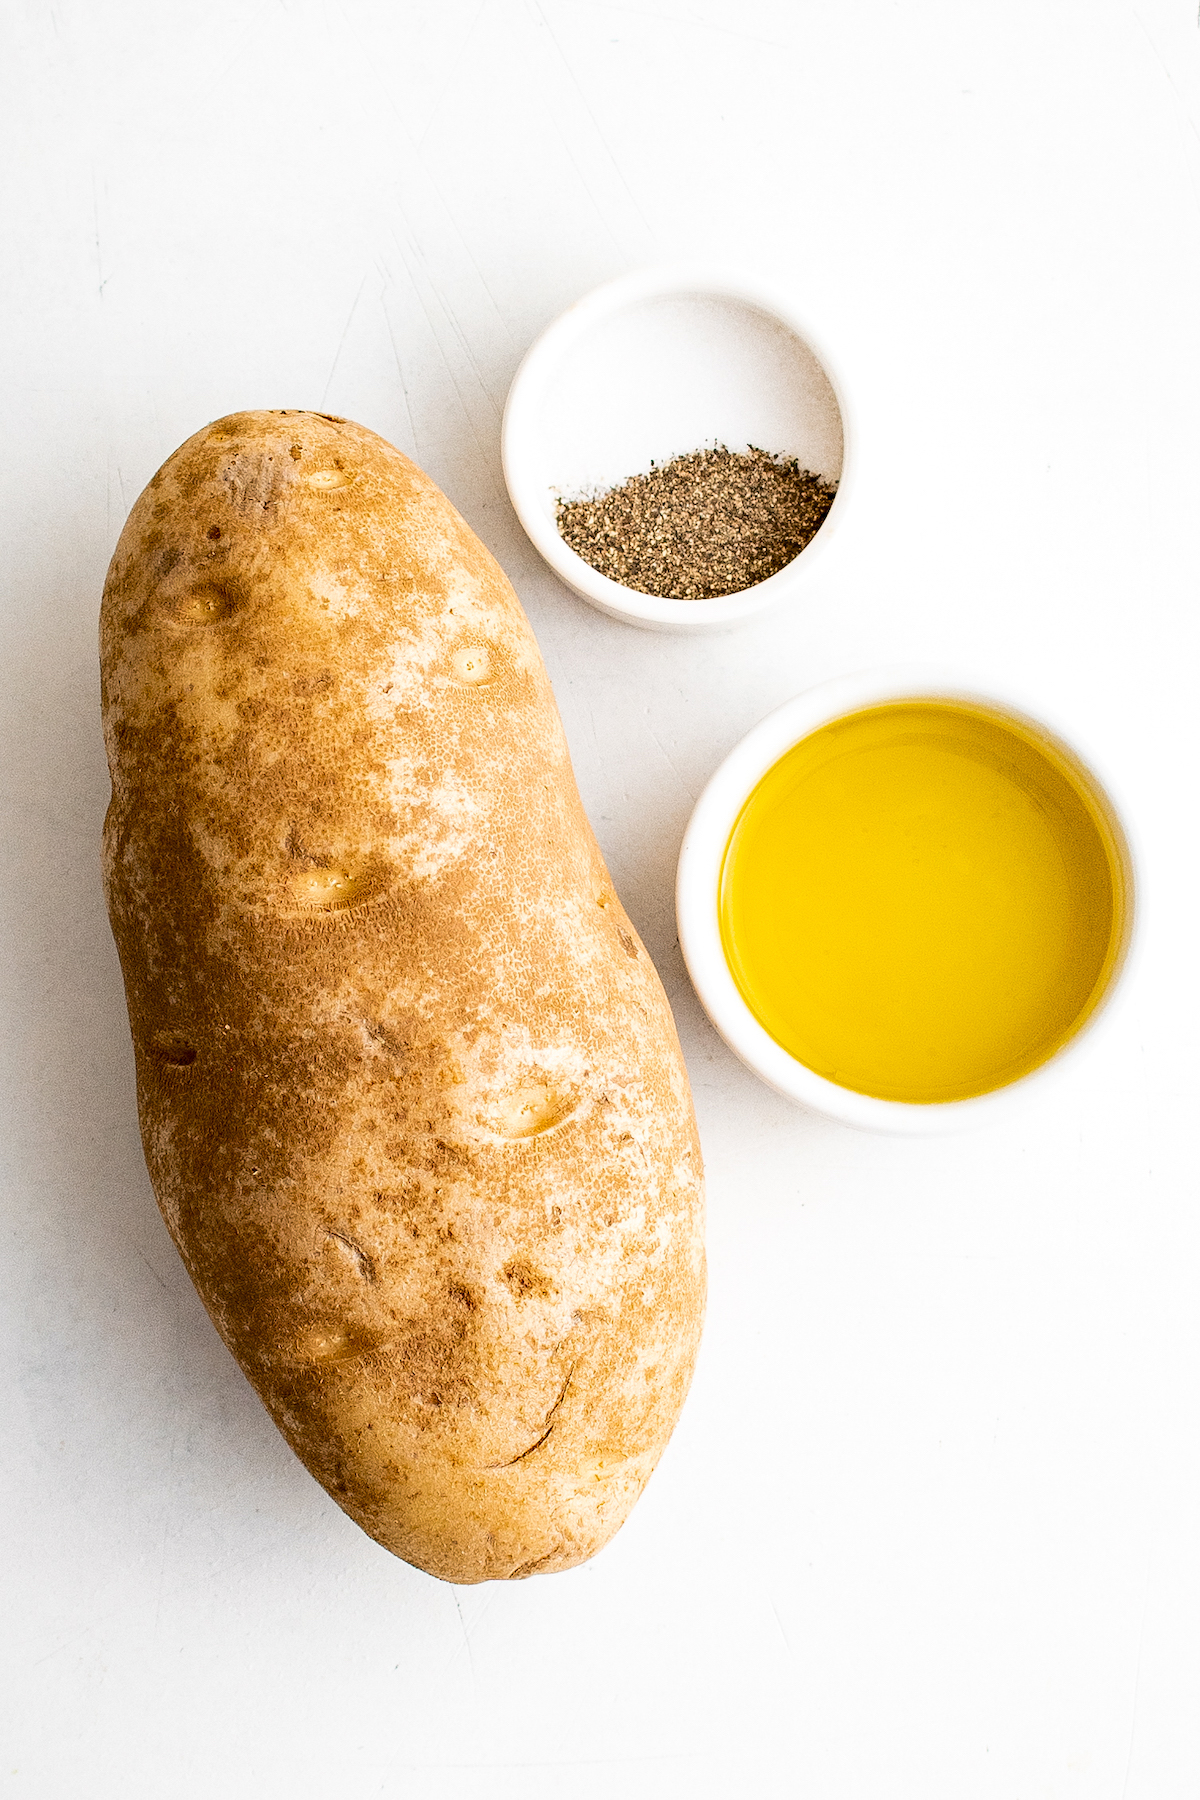 A russet potato, a dish of salt and pepper, and a dish of oil.